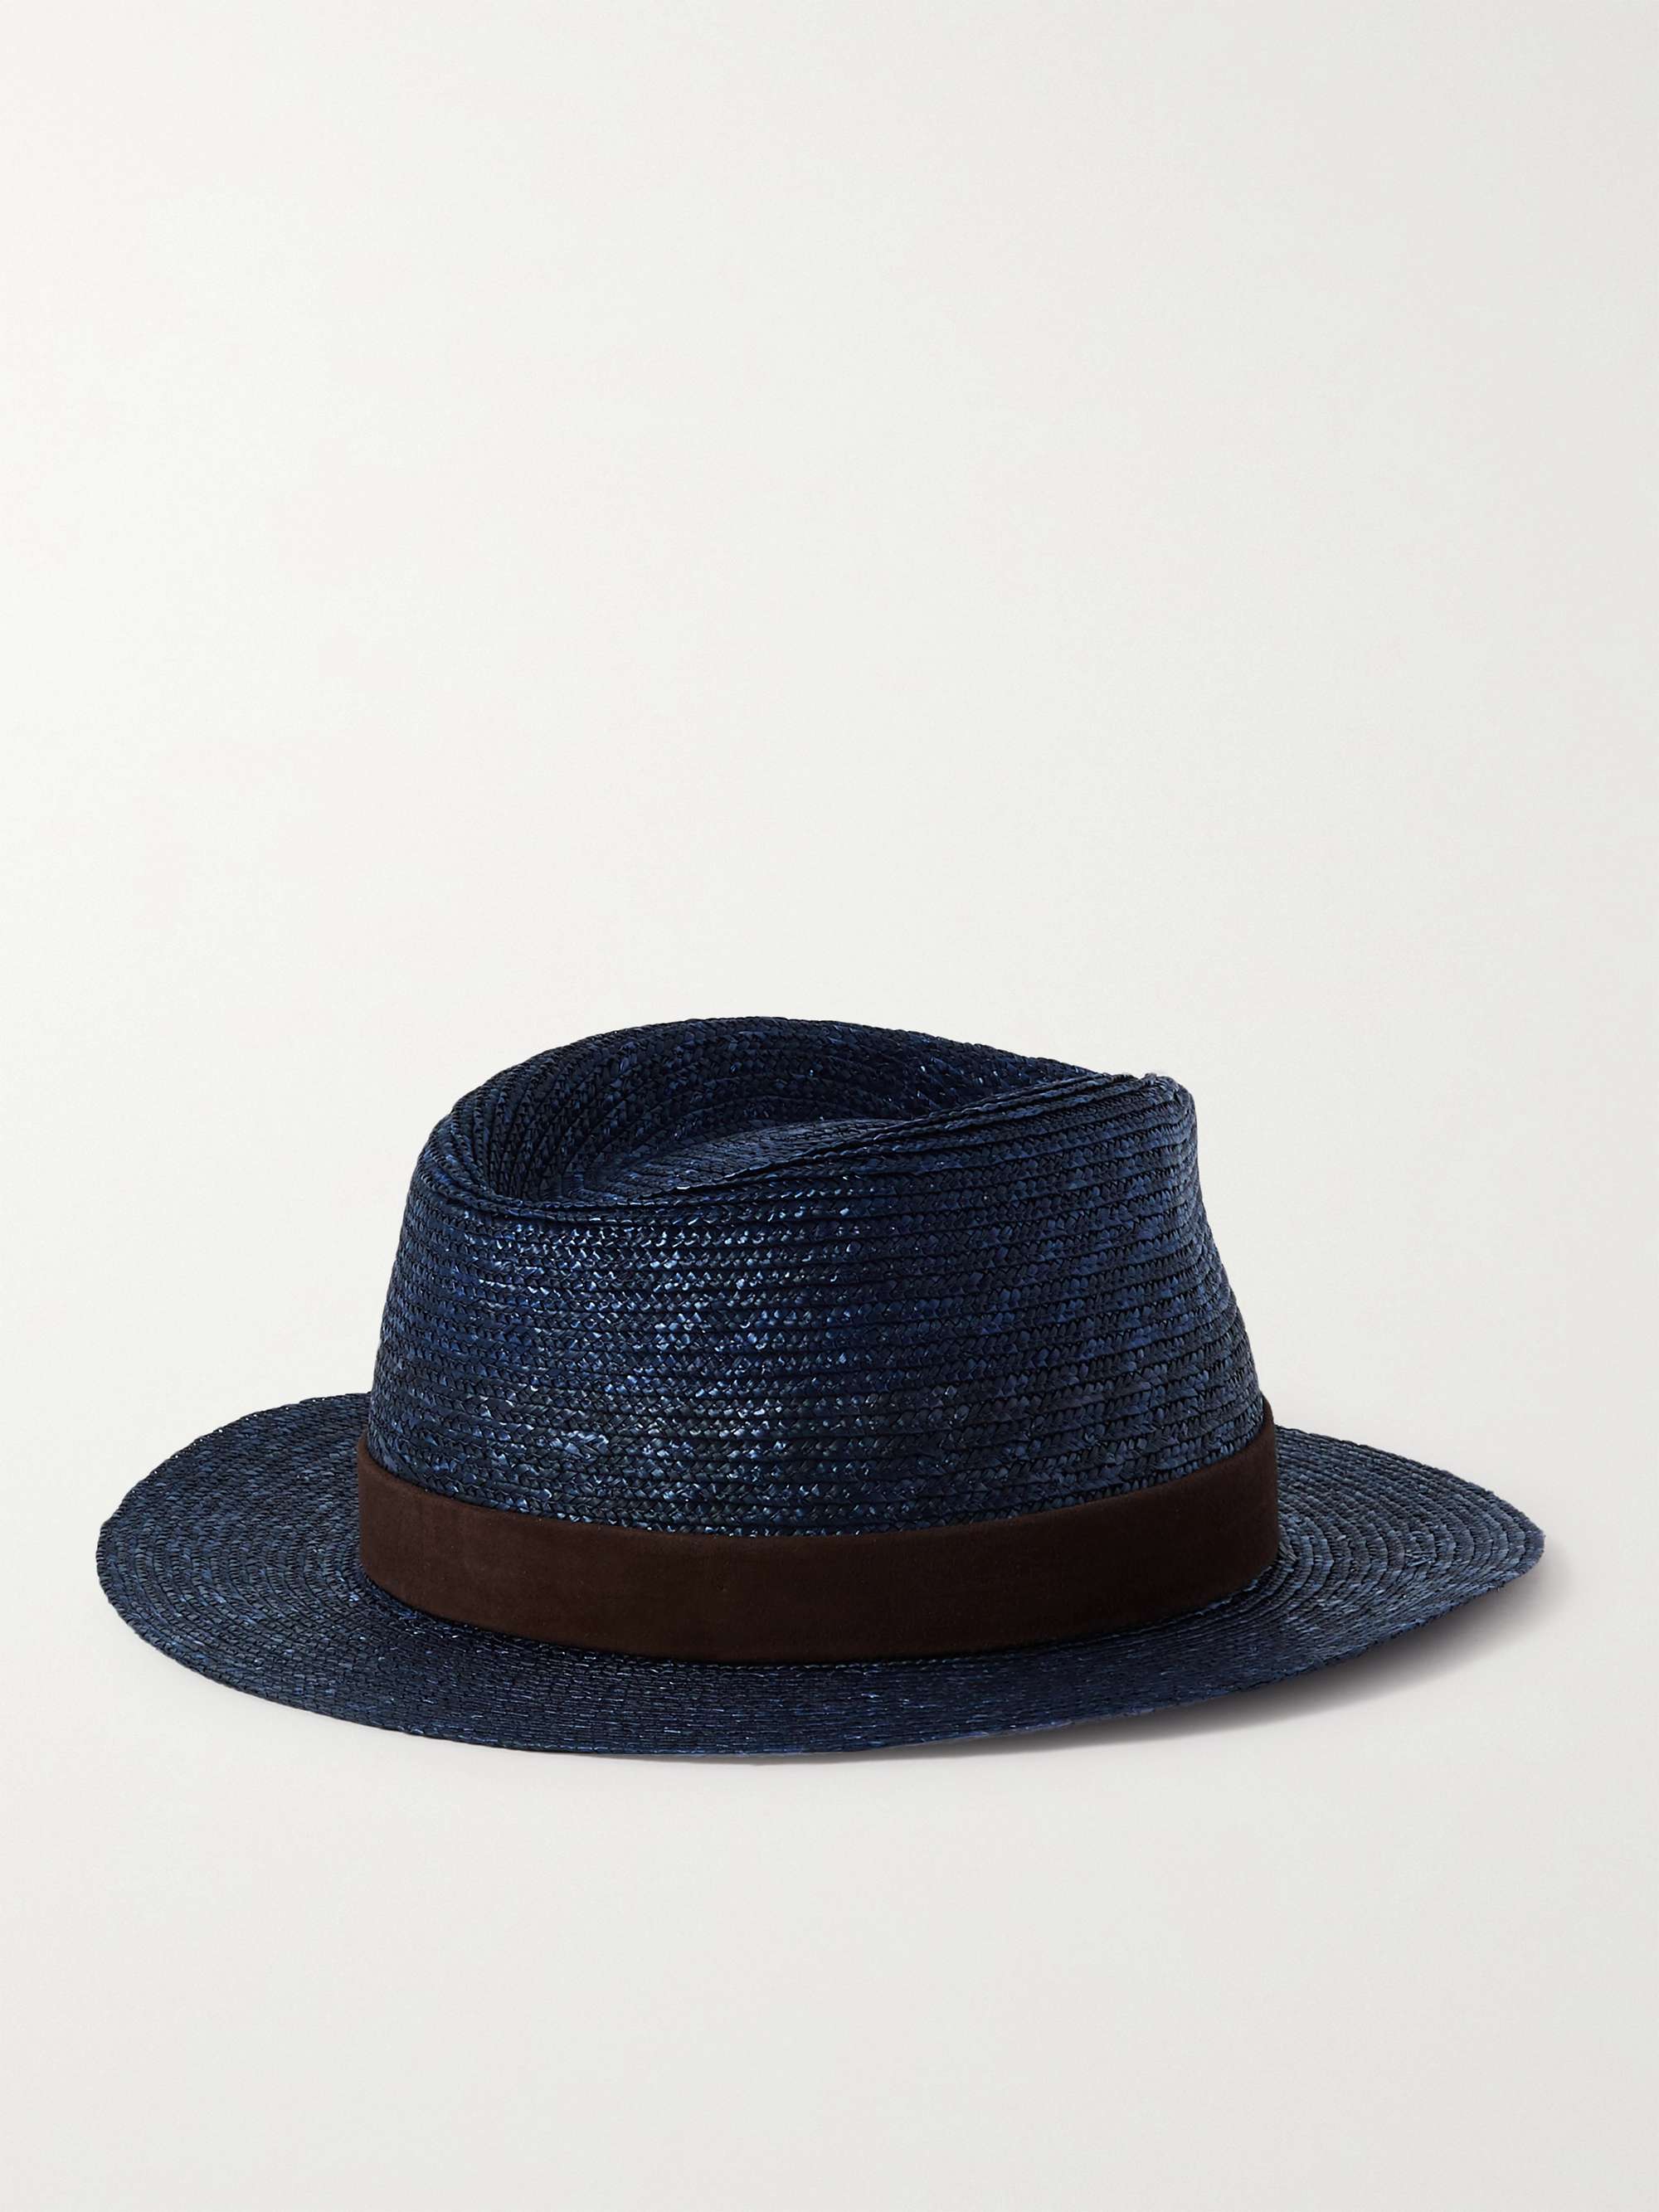 LOCK & CO HATTERS Suede-Trimmed Straw Panama Hat